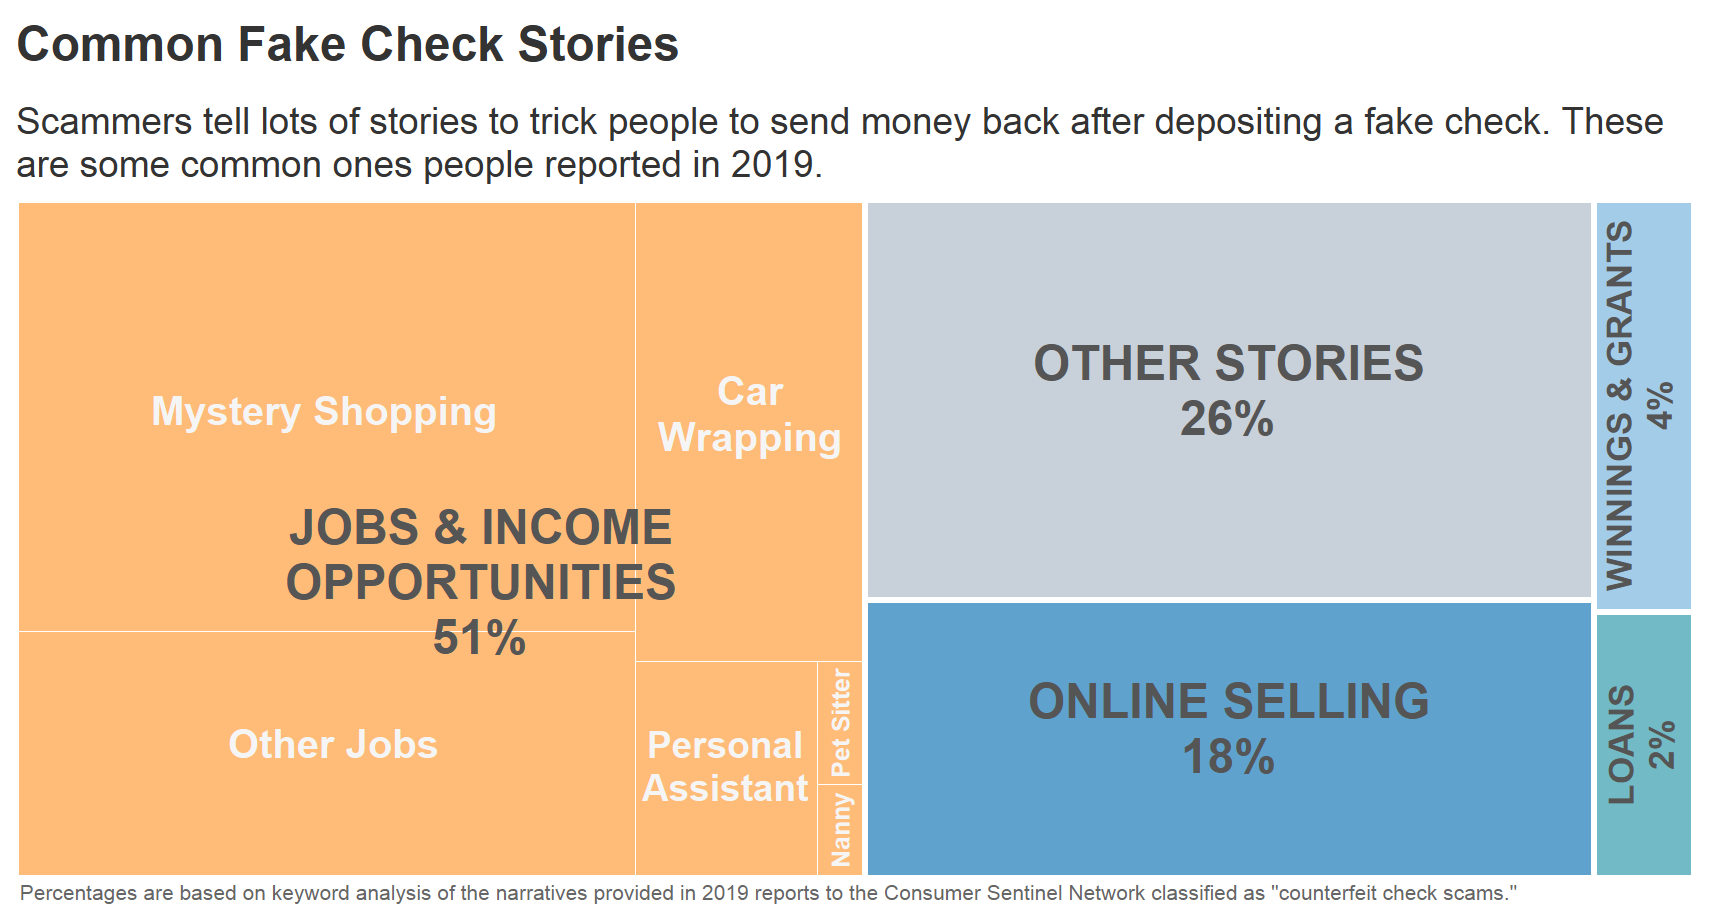 Scammers tell lots of stories to trick people to send money back after depositing a fake check, including mystery shopping, online selling, loans, personal assistant, other jobs, car wrapping, winnings and grants and other stories.